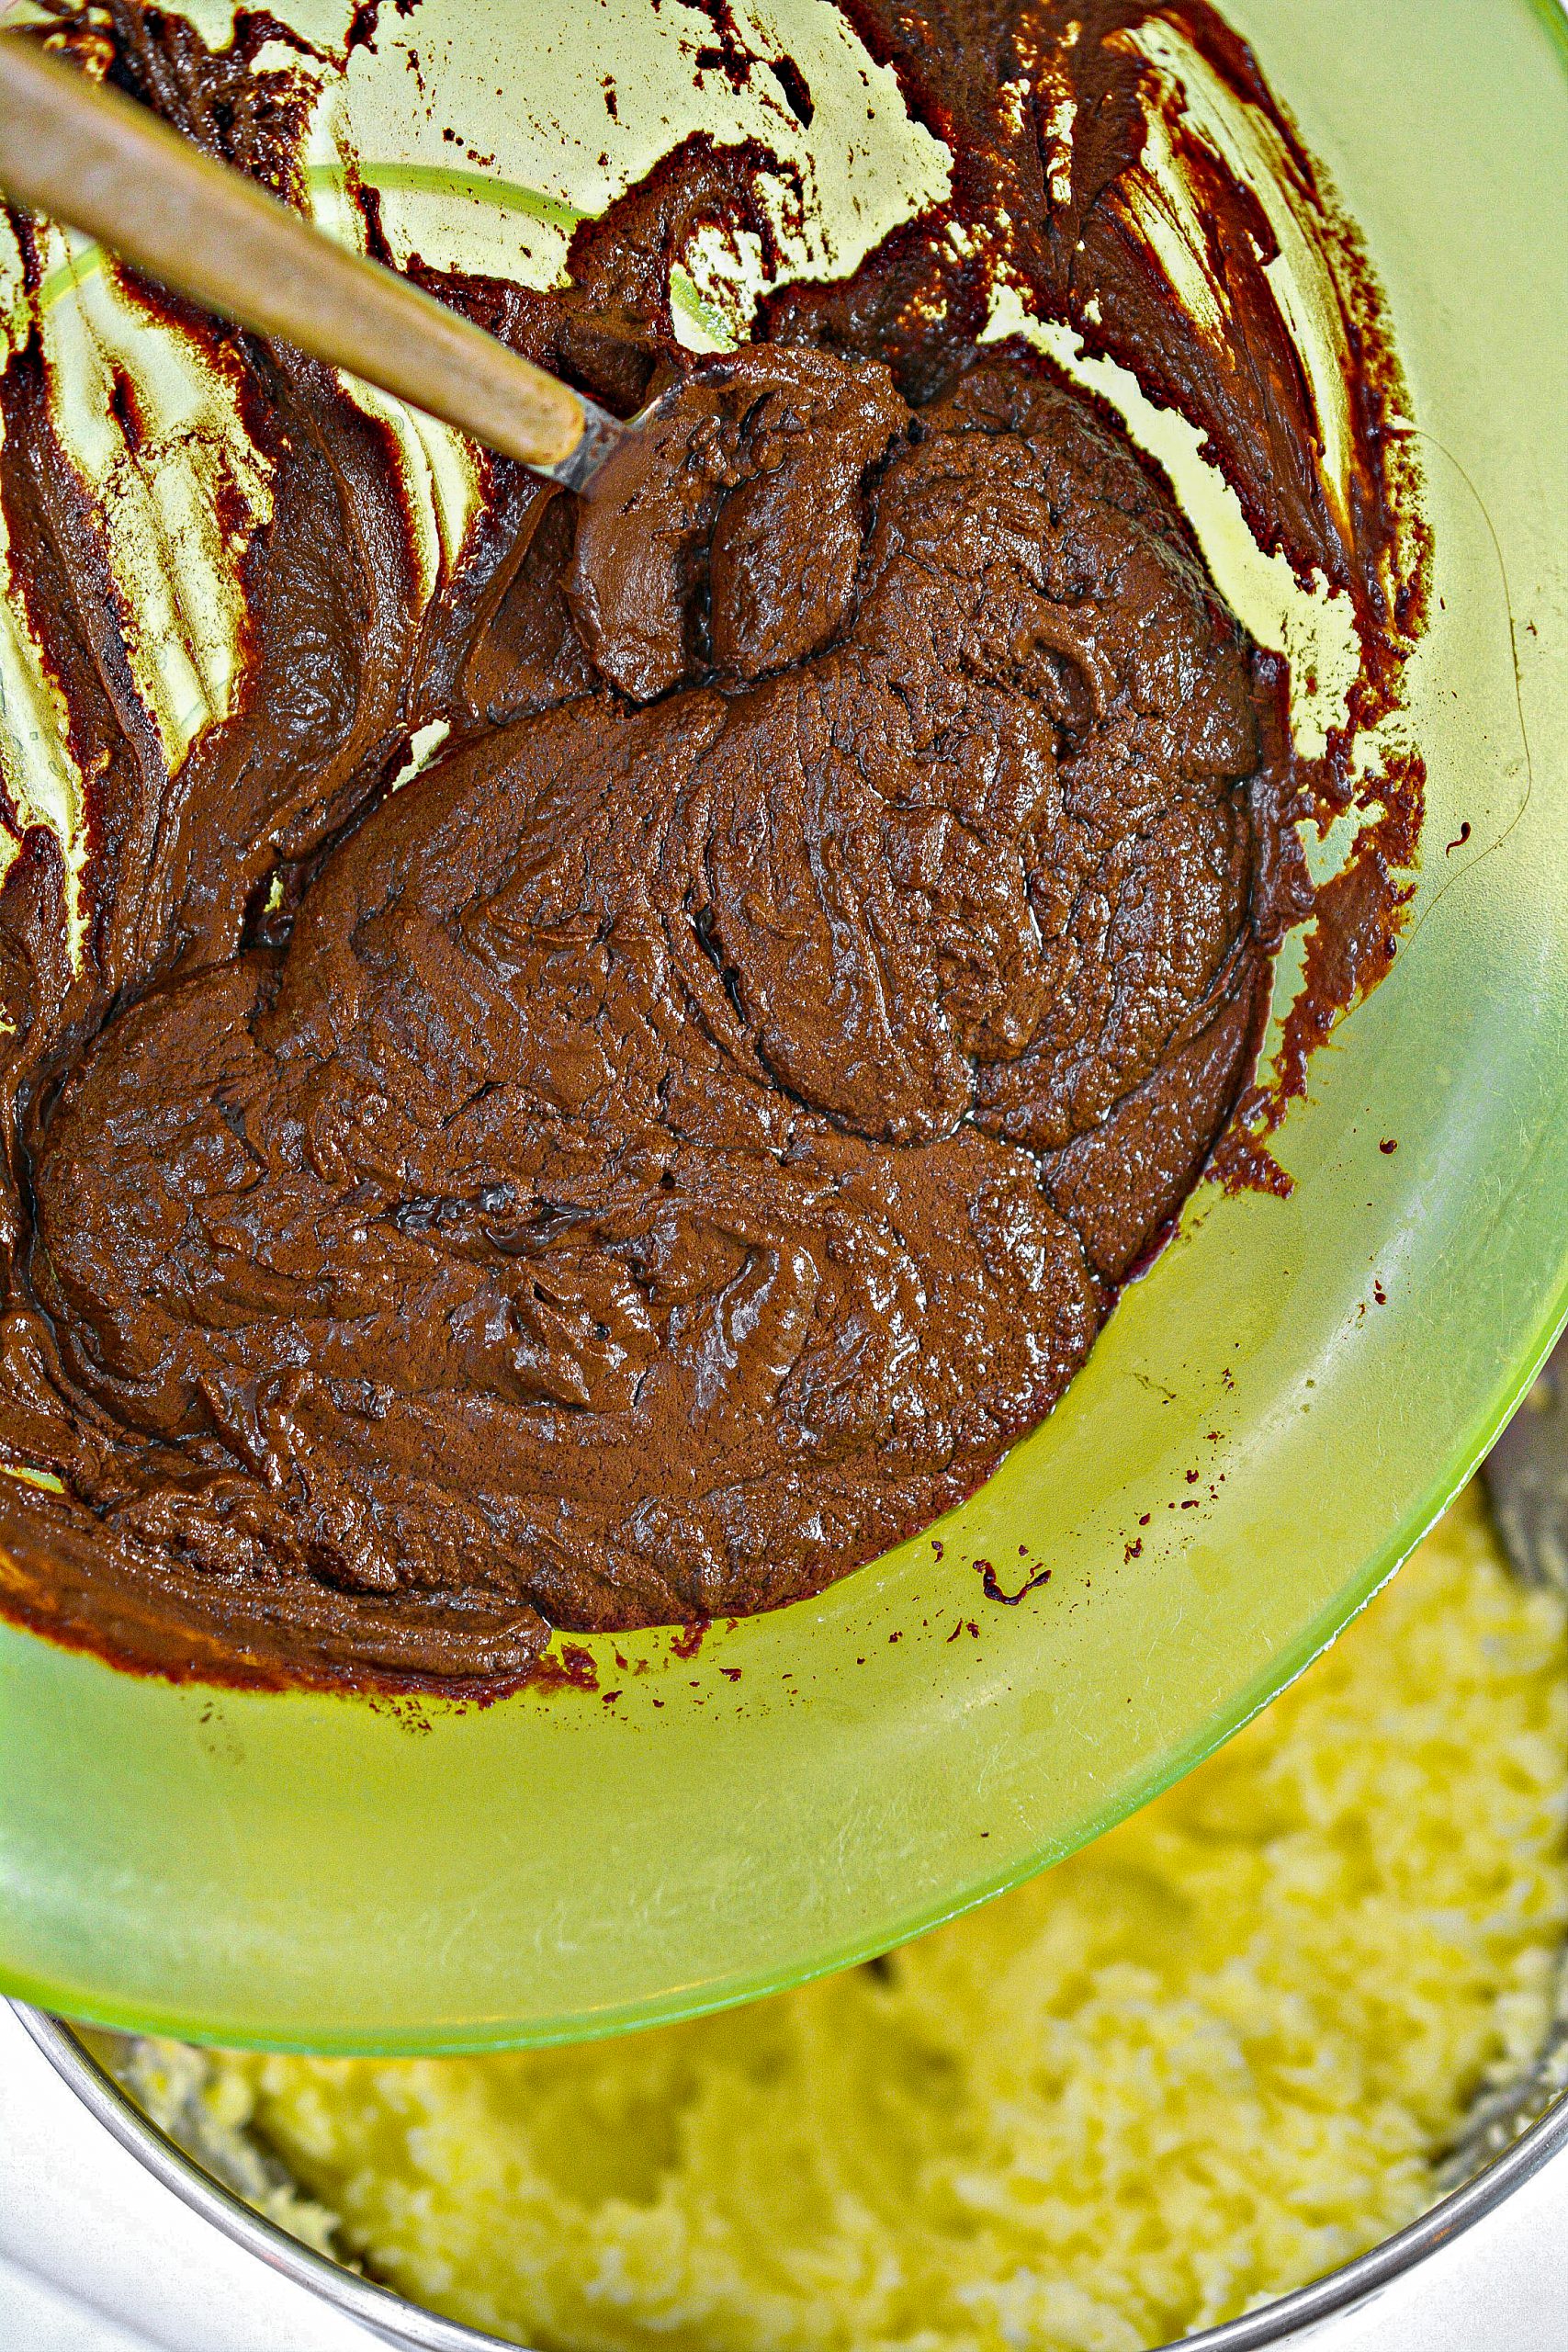 Mix the chocolate and vanilla into the butter and sugar mixture.